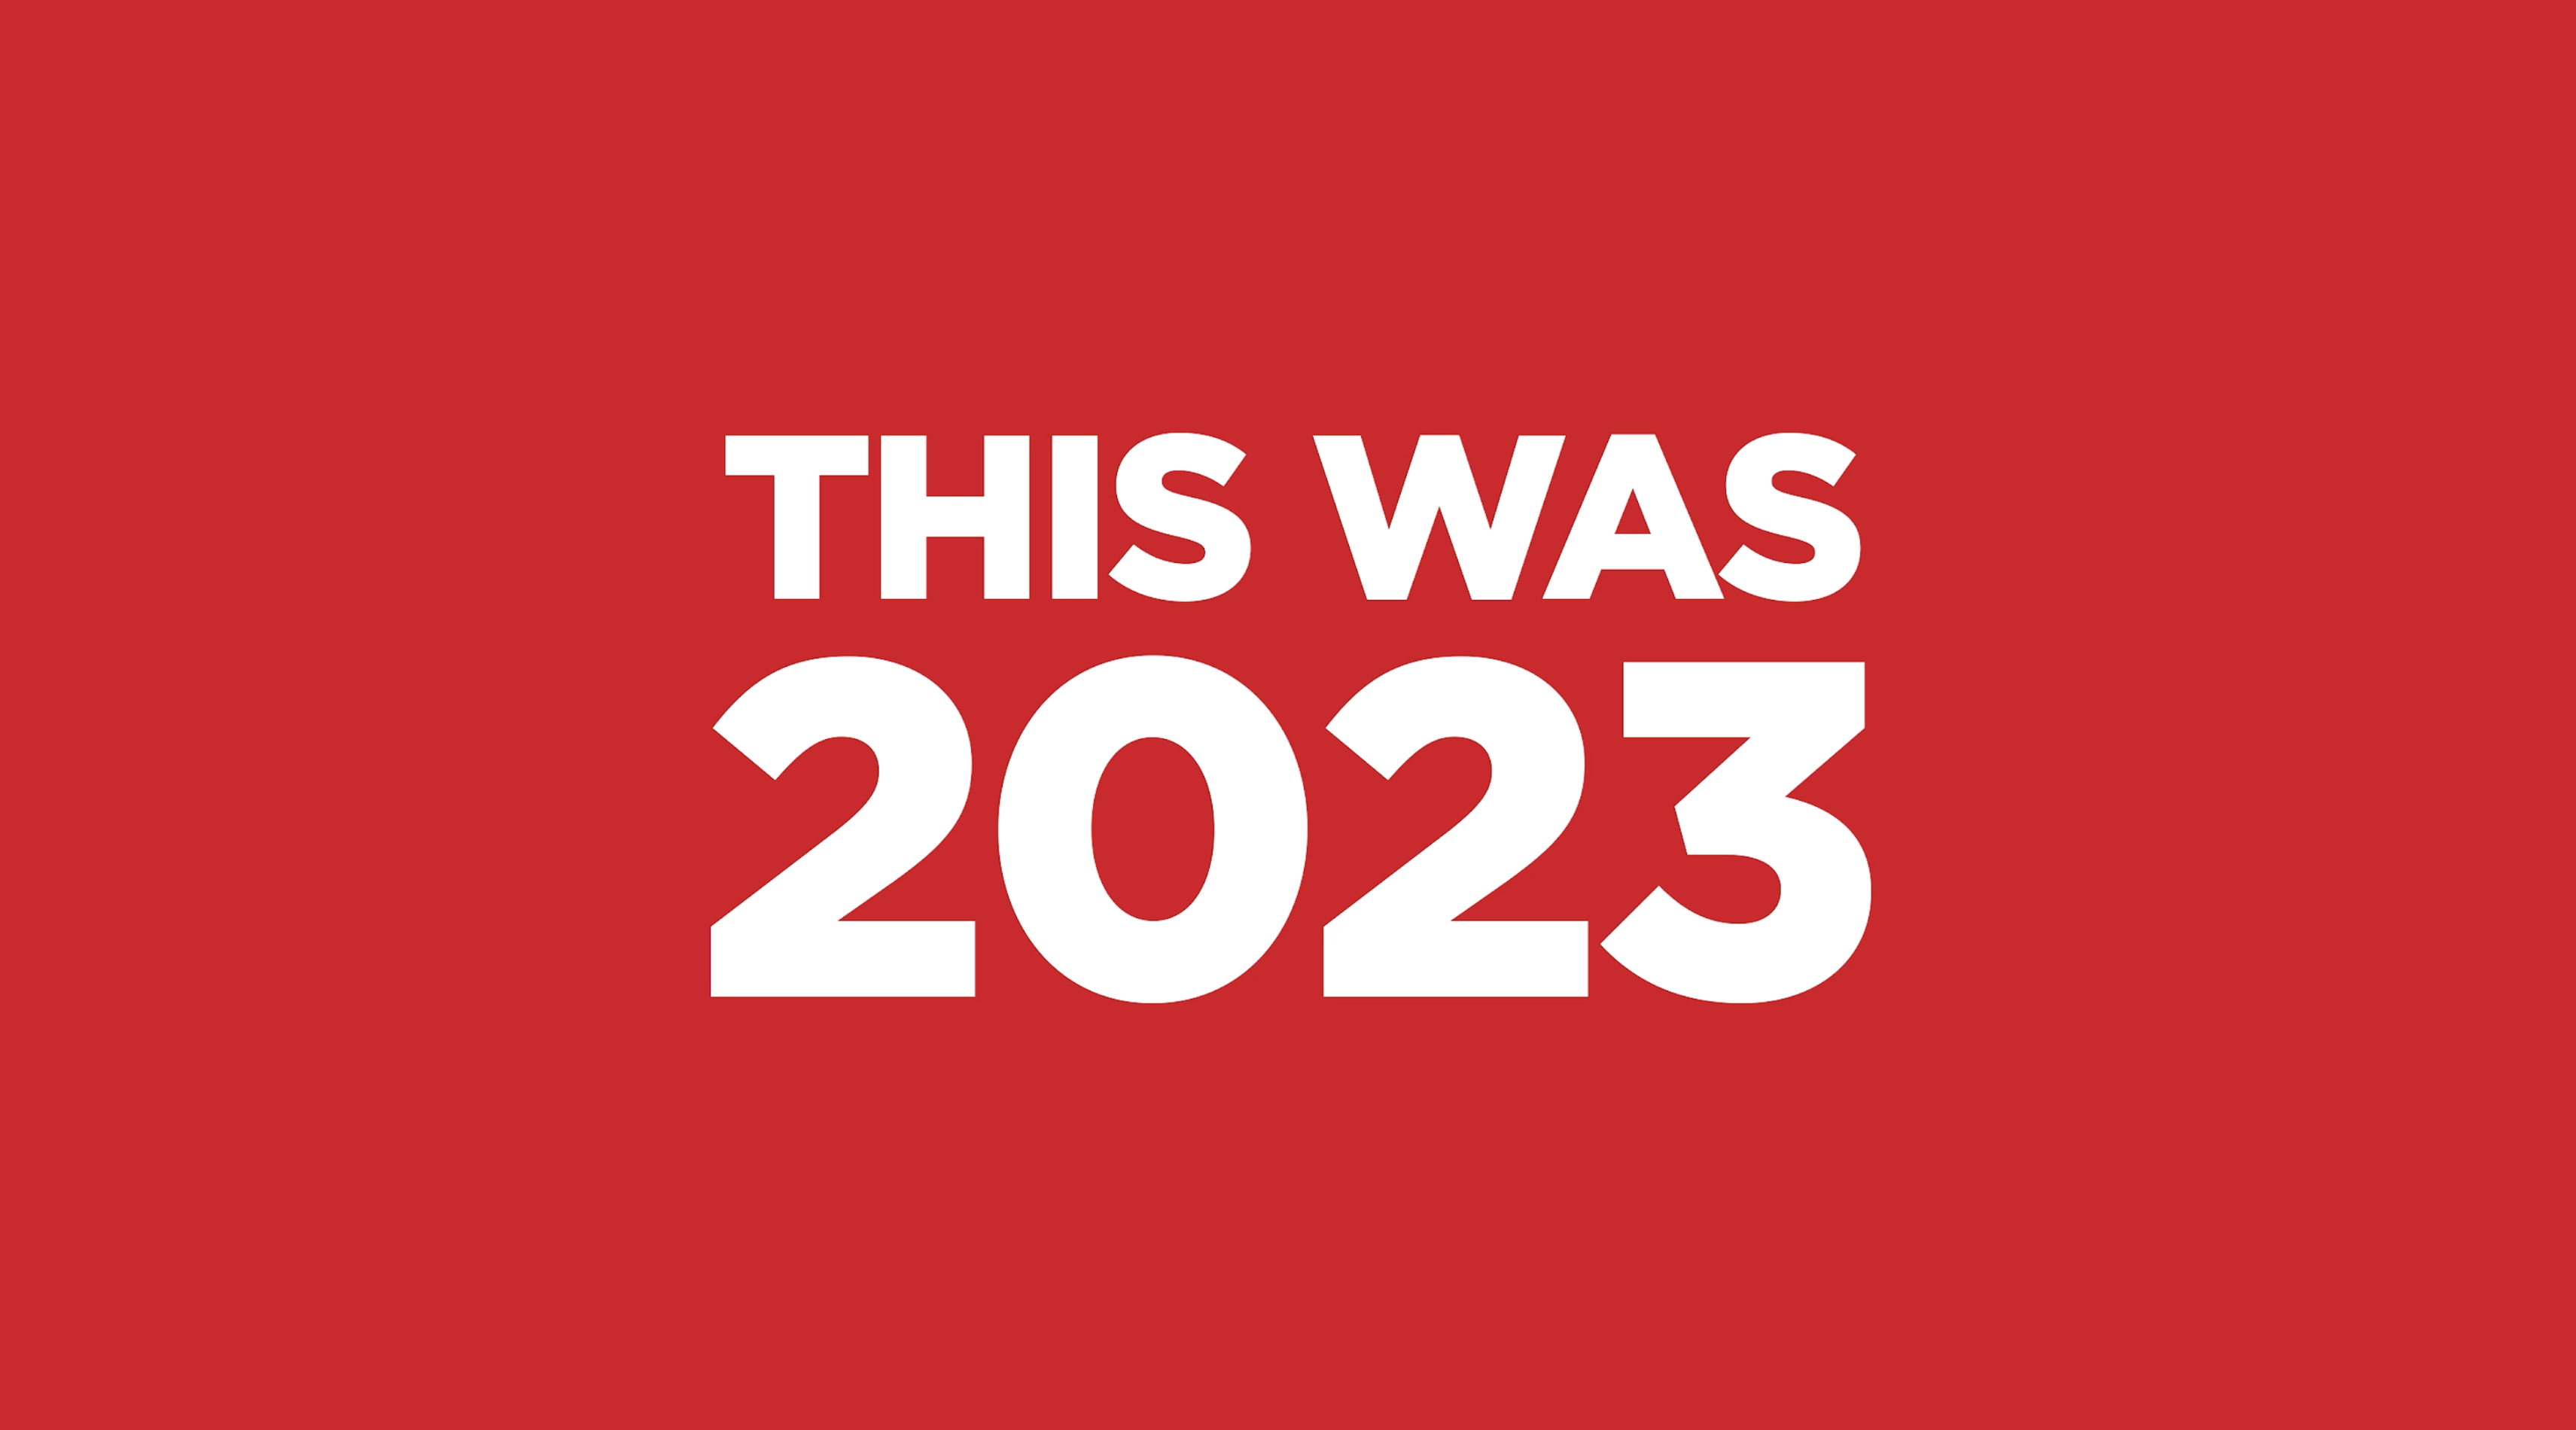 This was 2023!